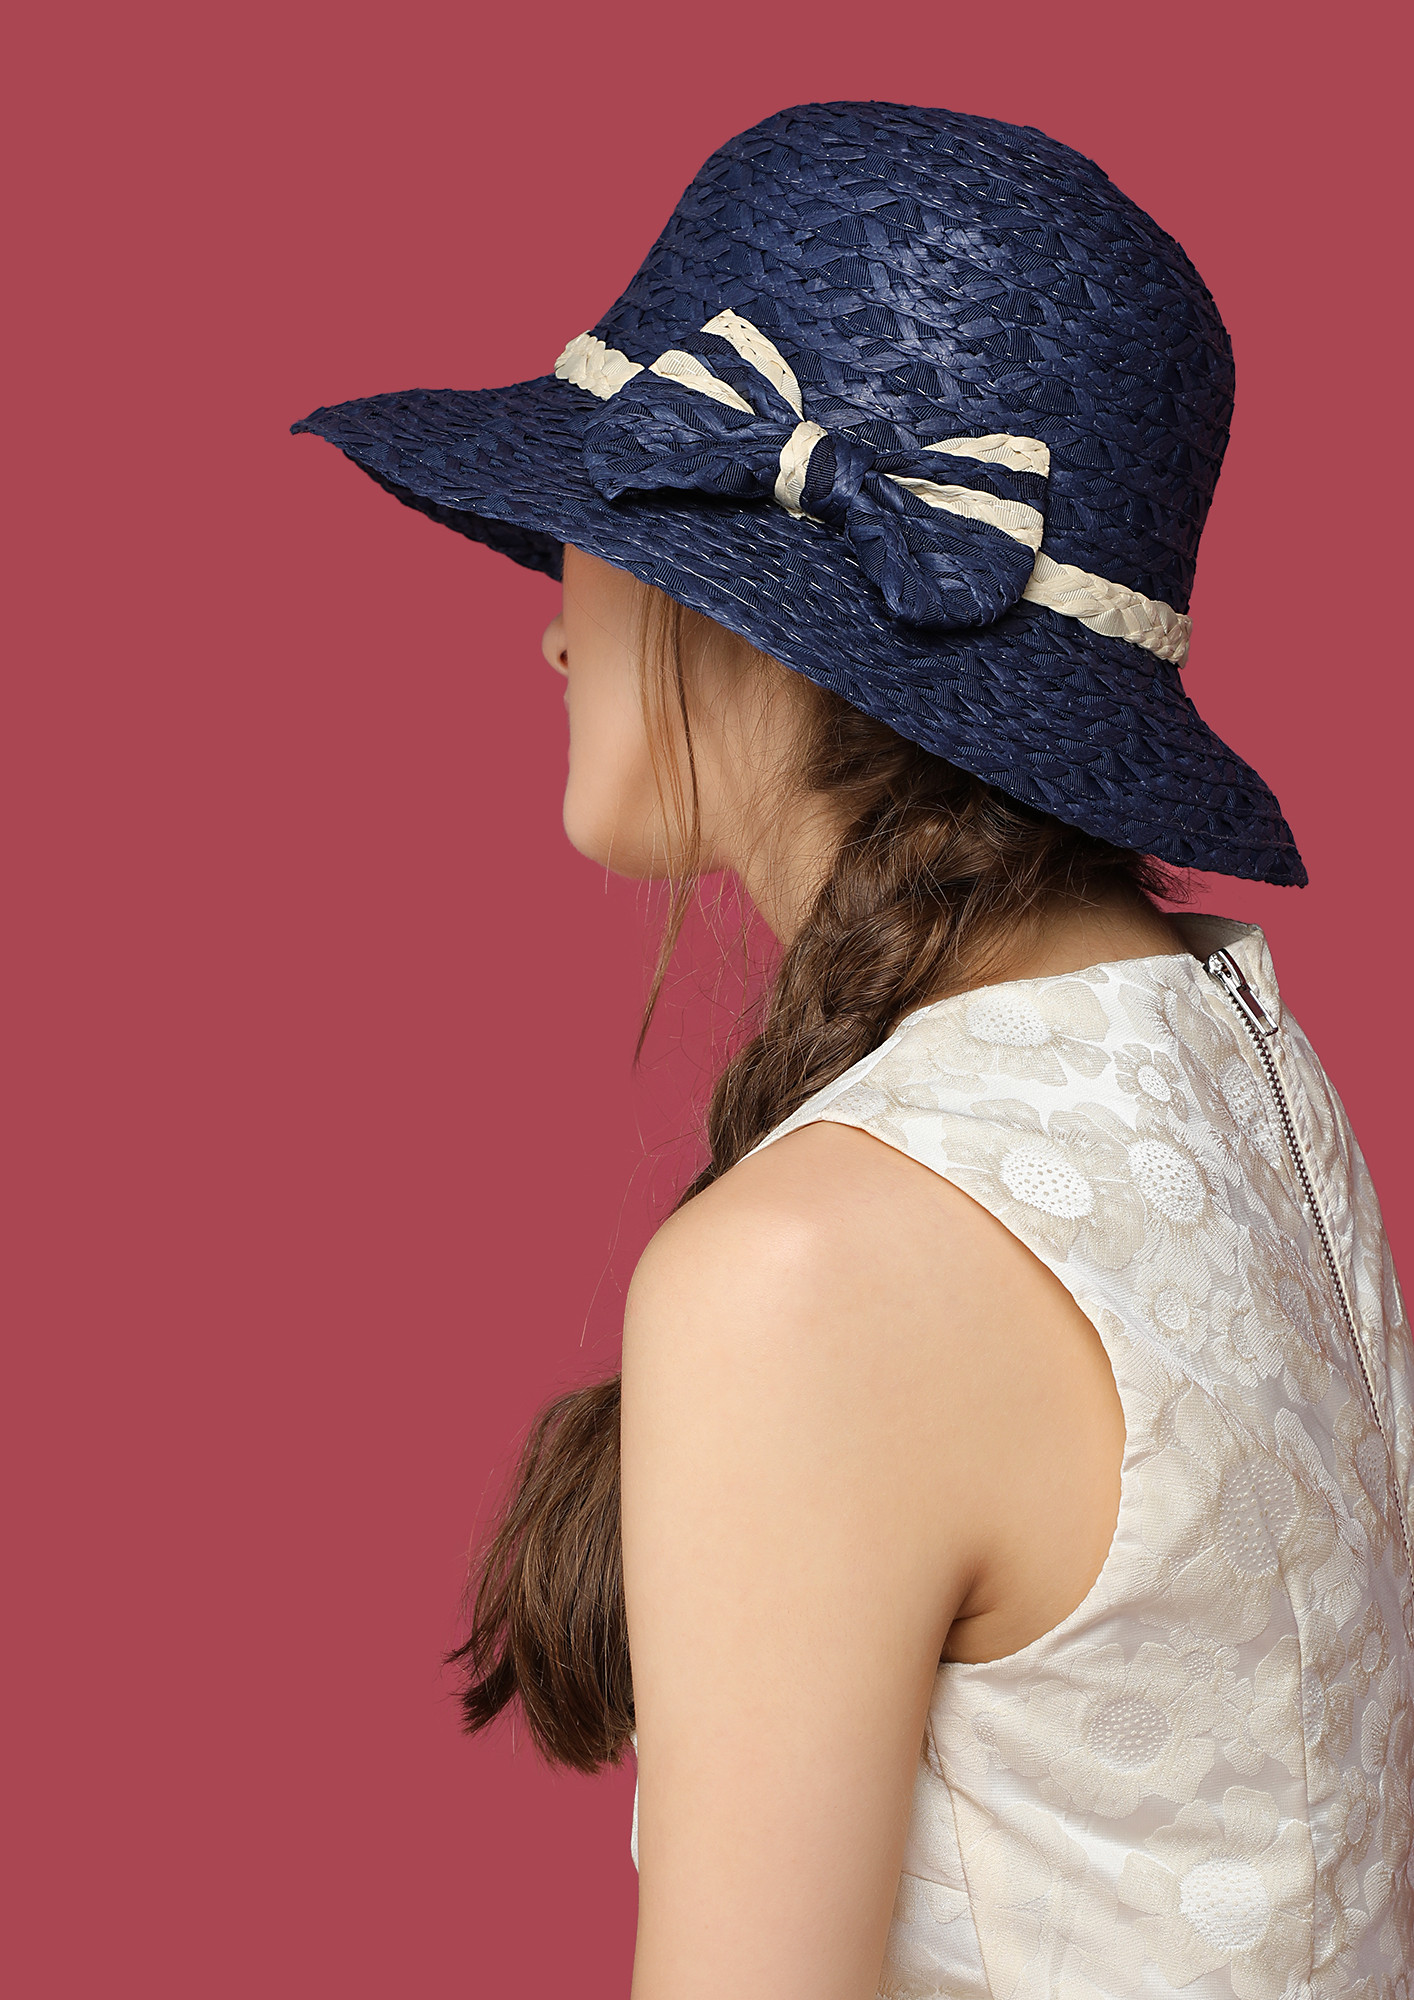 SOAKING ALL SUNSHINE WITH NAVY HAT